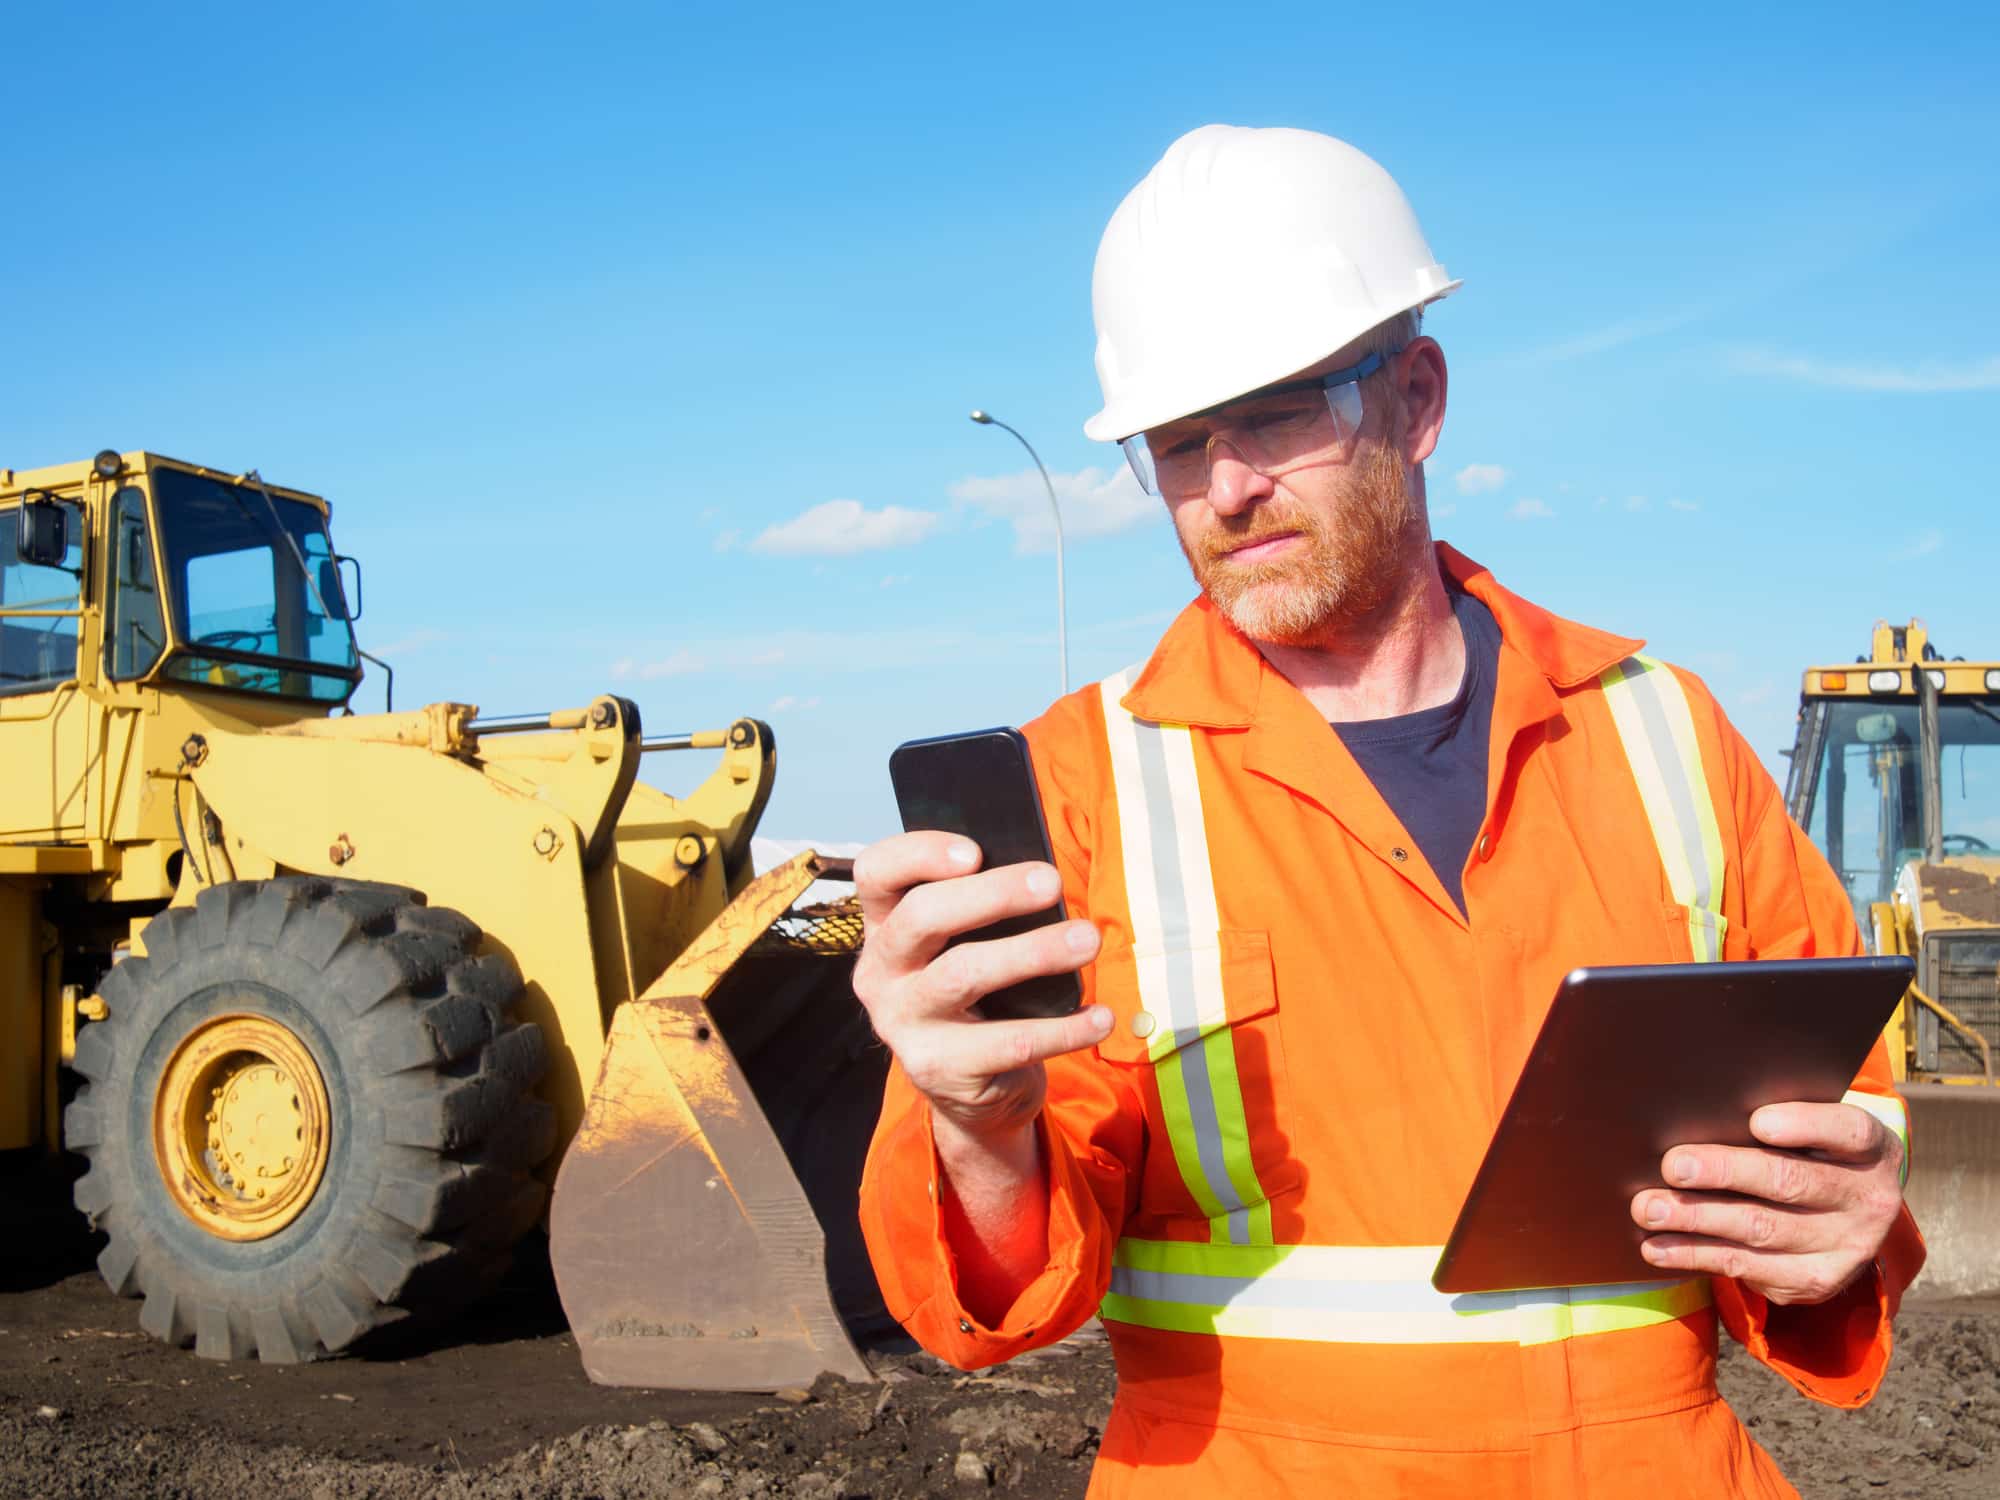 How Mobile Field Service Software Helps Technicians Succeed